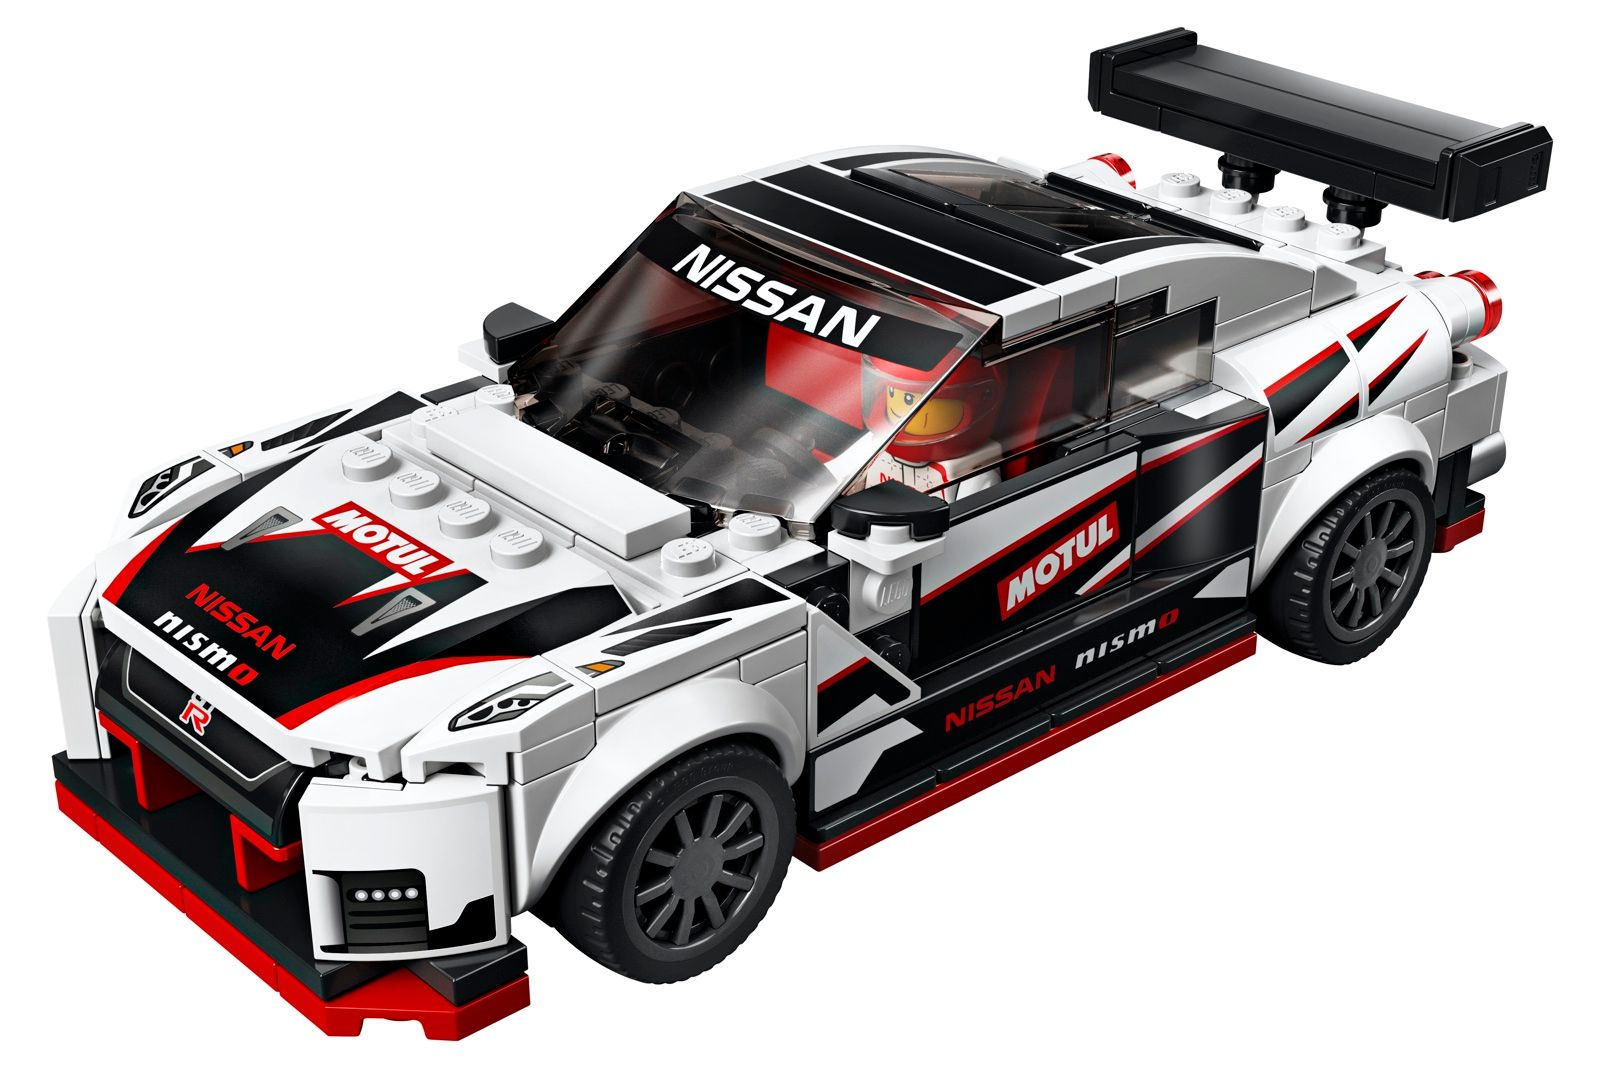 Lego Speed Champions next launch is the epic Nissan GT-R NISMO image 1